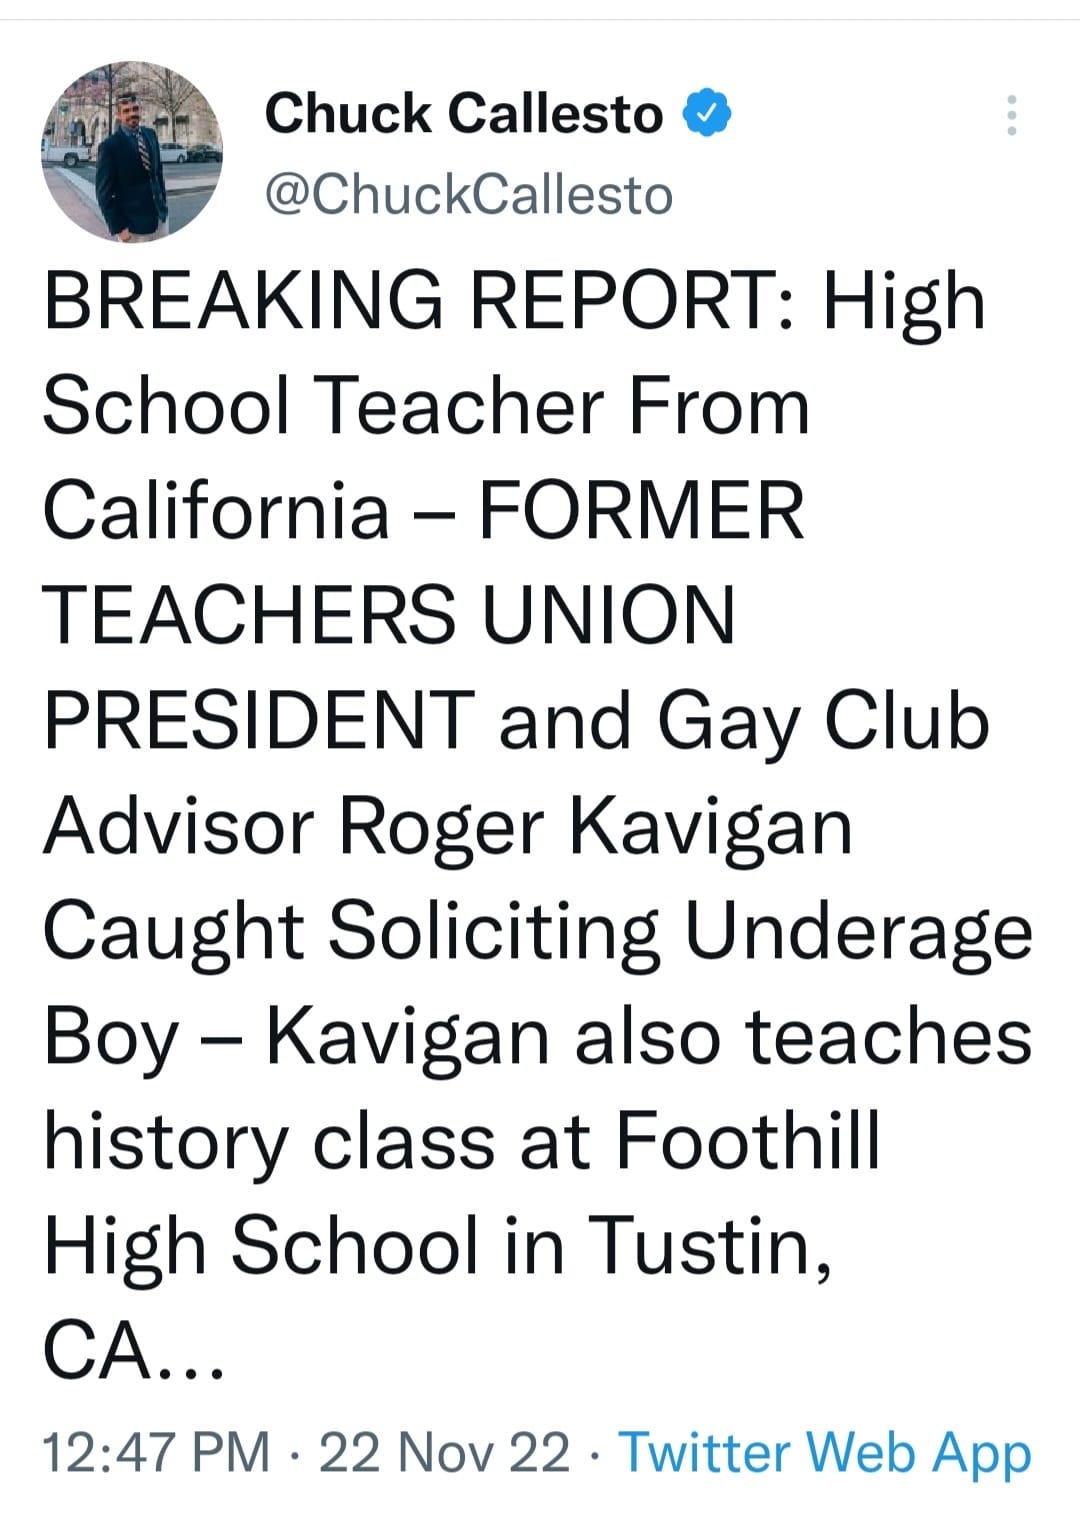 May be an image of 1 person and text that says 'Chuck Callesto @ChuckCallesto BREAKING REPORT: High School Teacher From California -FORMER TEACHERS UNION PRESIDENT and Gay Club Advisor Roger Kavigan Caught Soliciting Underage Boy Kavigan also teaches history class at Foothill High School in Tustin, CA... 12:47 PM 22 Nov 22. Twitter Web App'